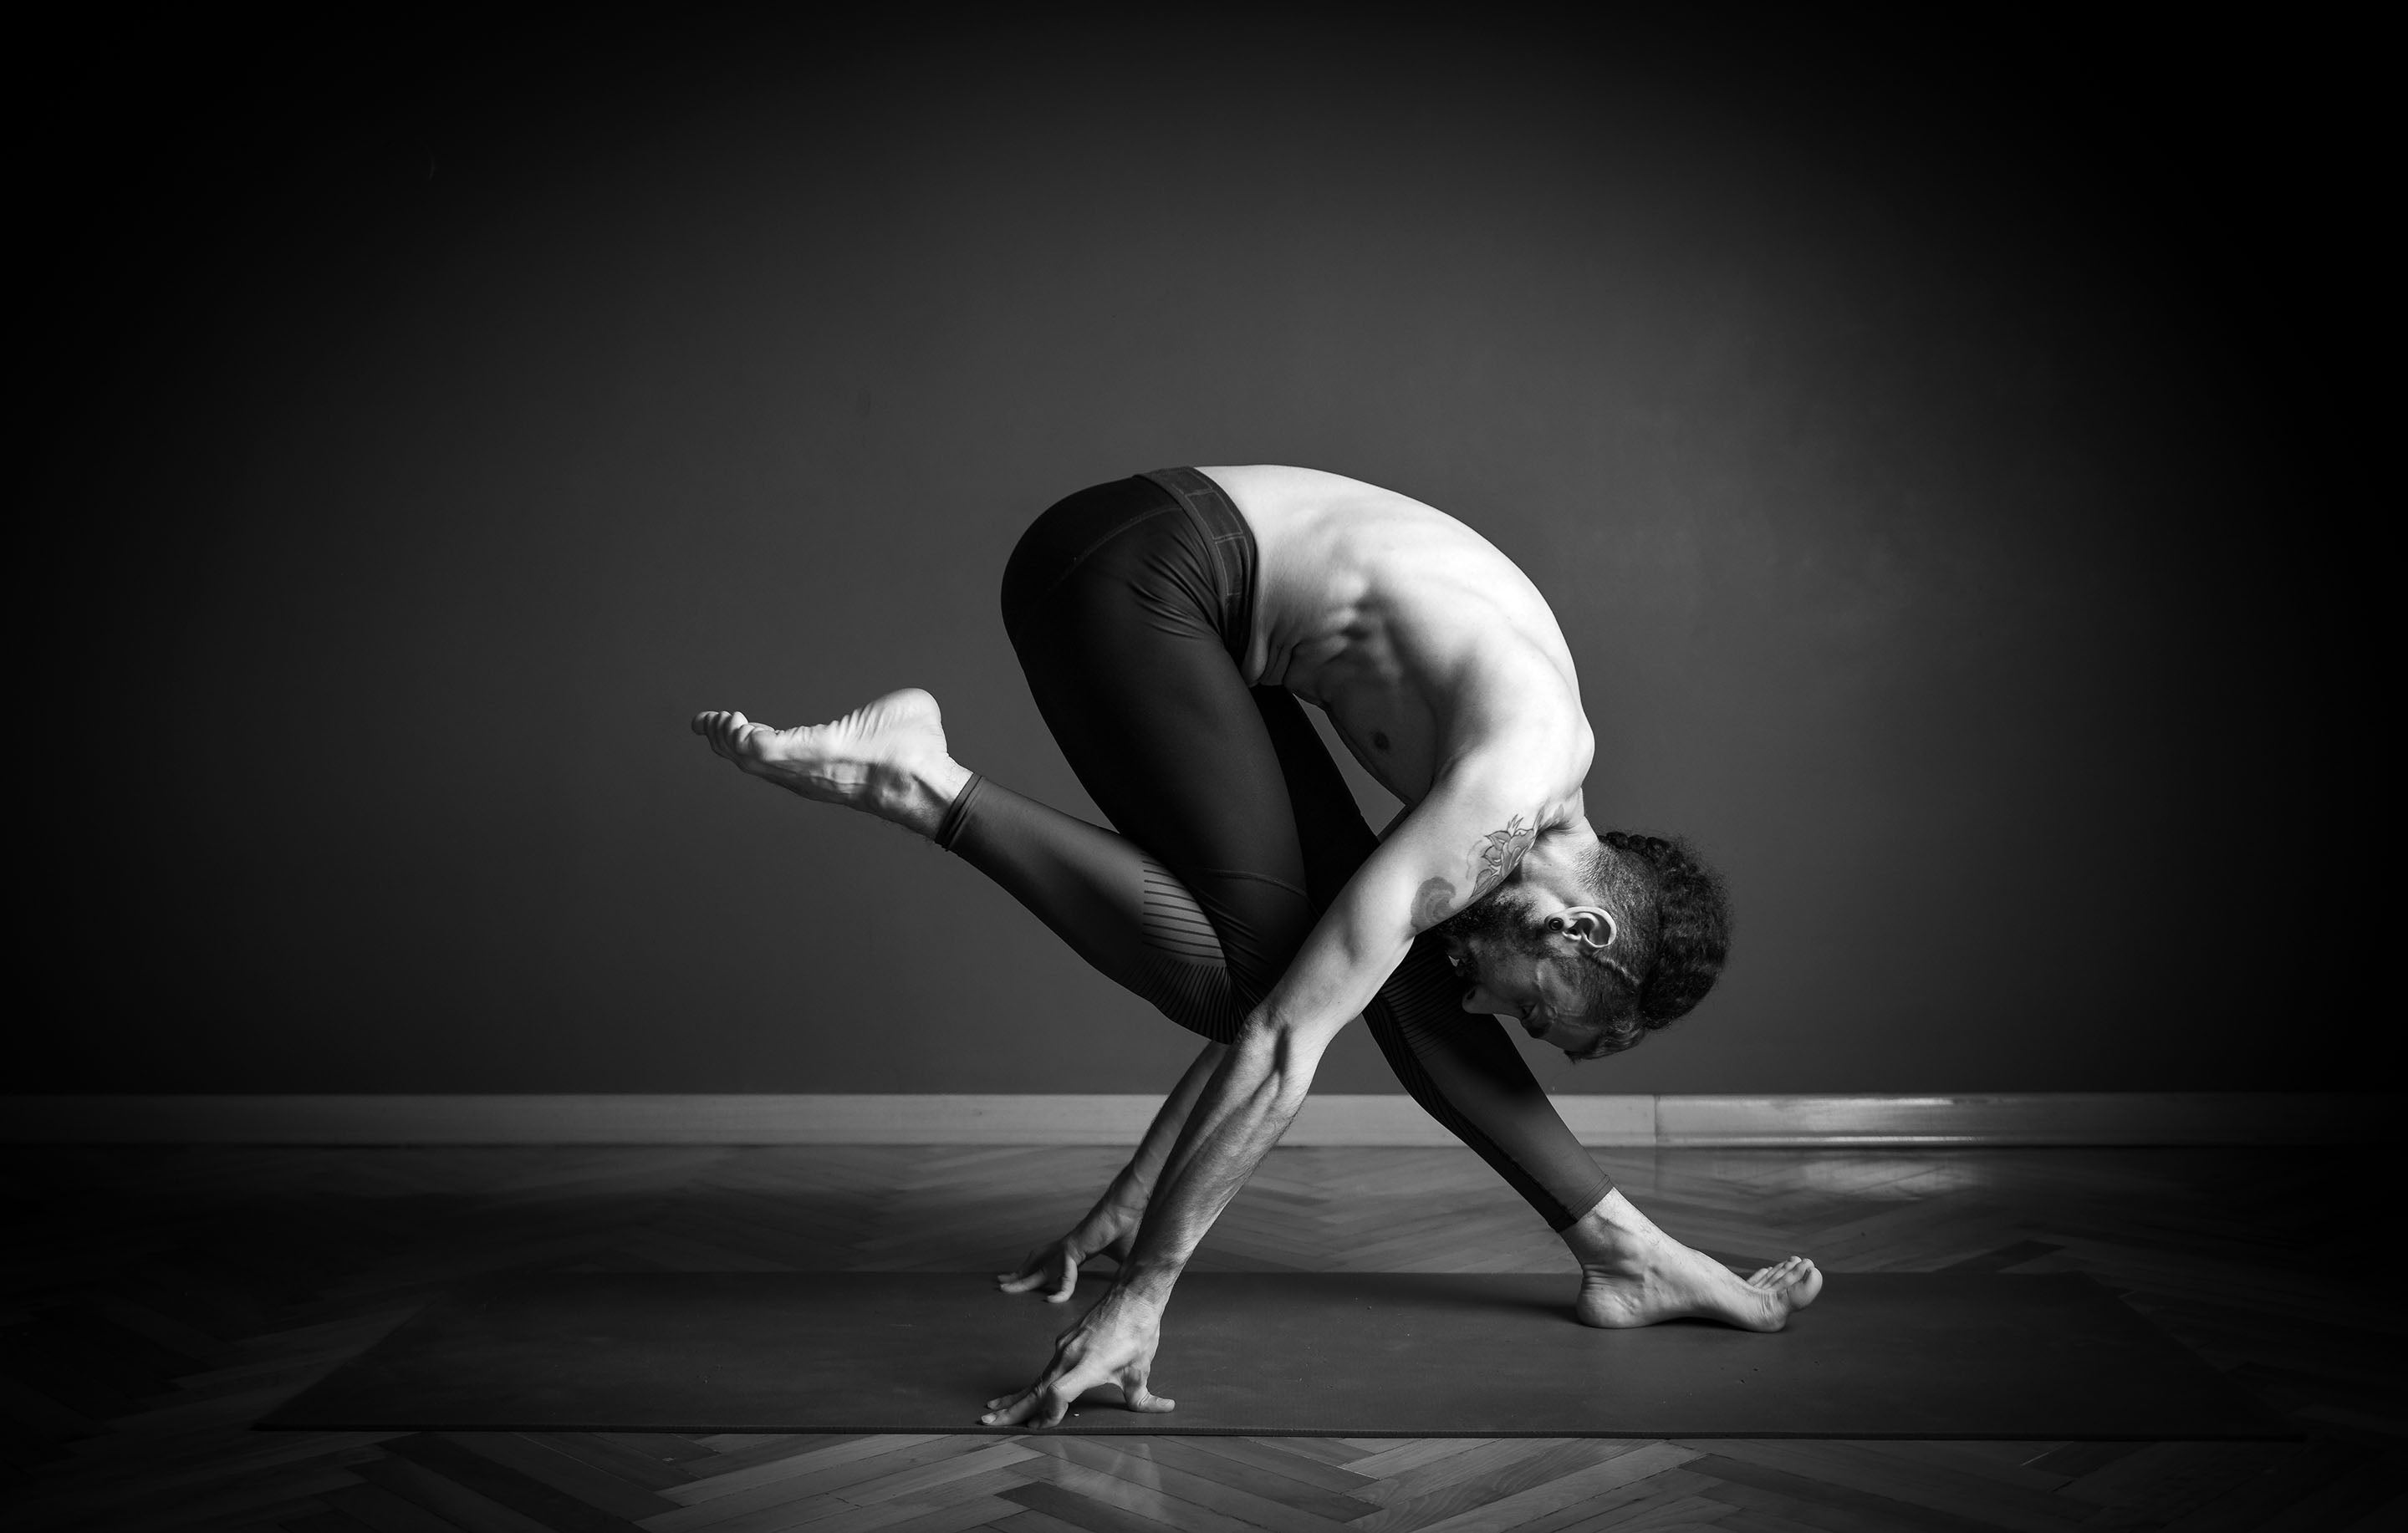 Extremely flexible yogi in a cool pose black and white | Asana Singapore - Challenge The Norm